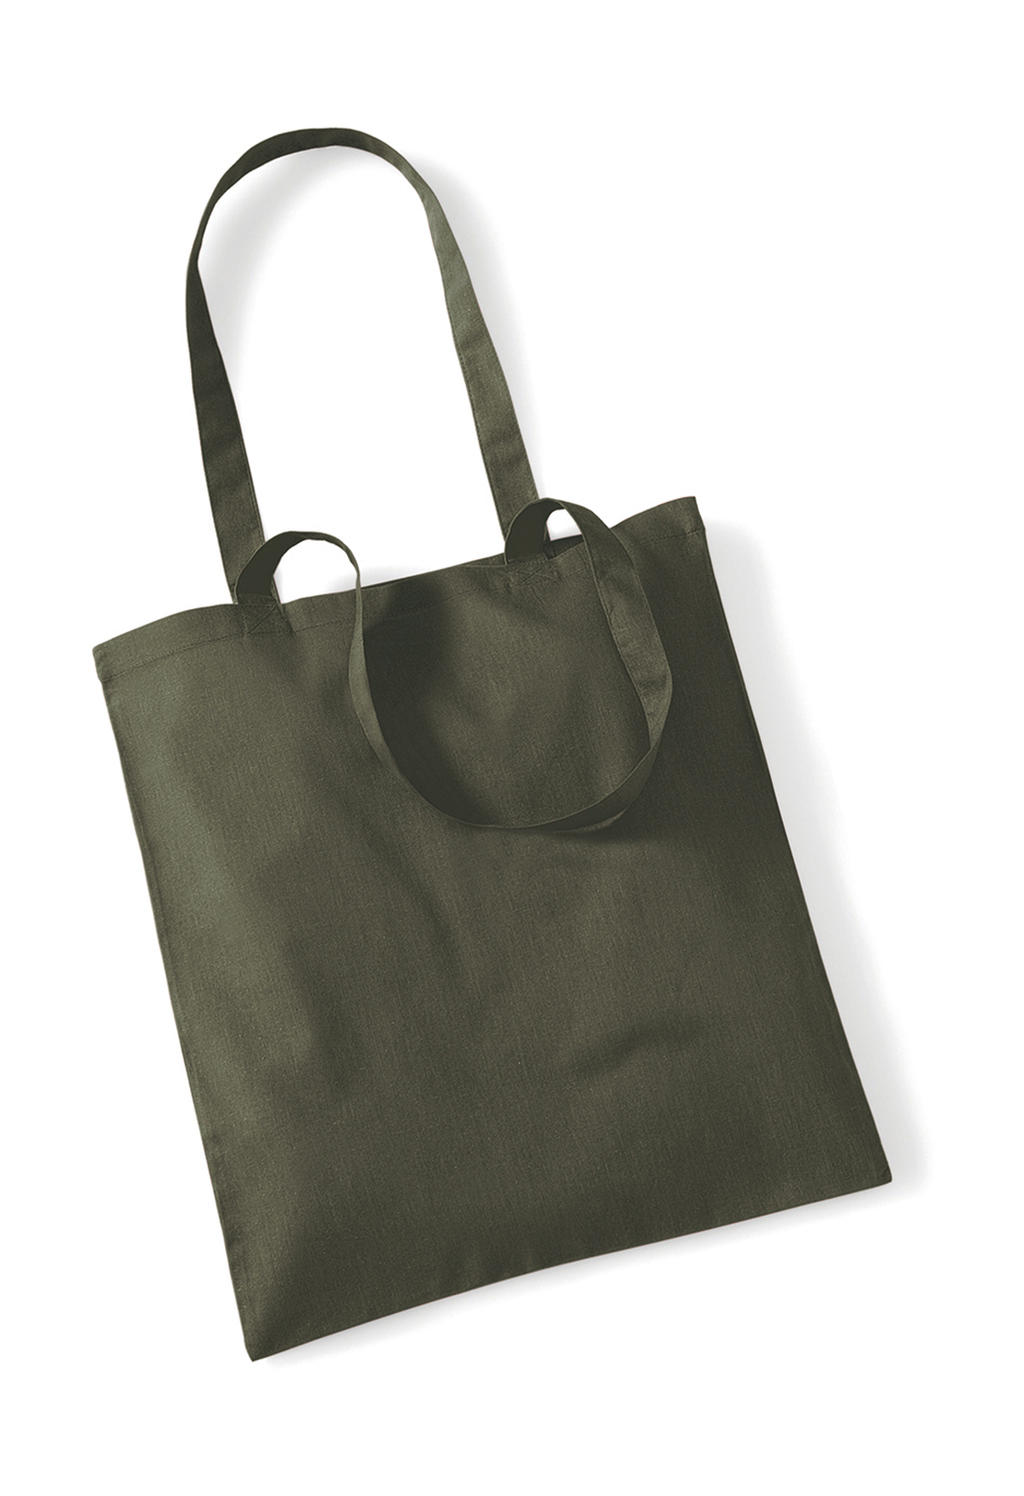  Bag for Life - Long Handles in Farbe Olive